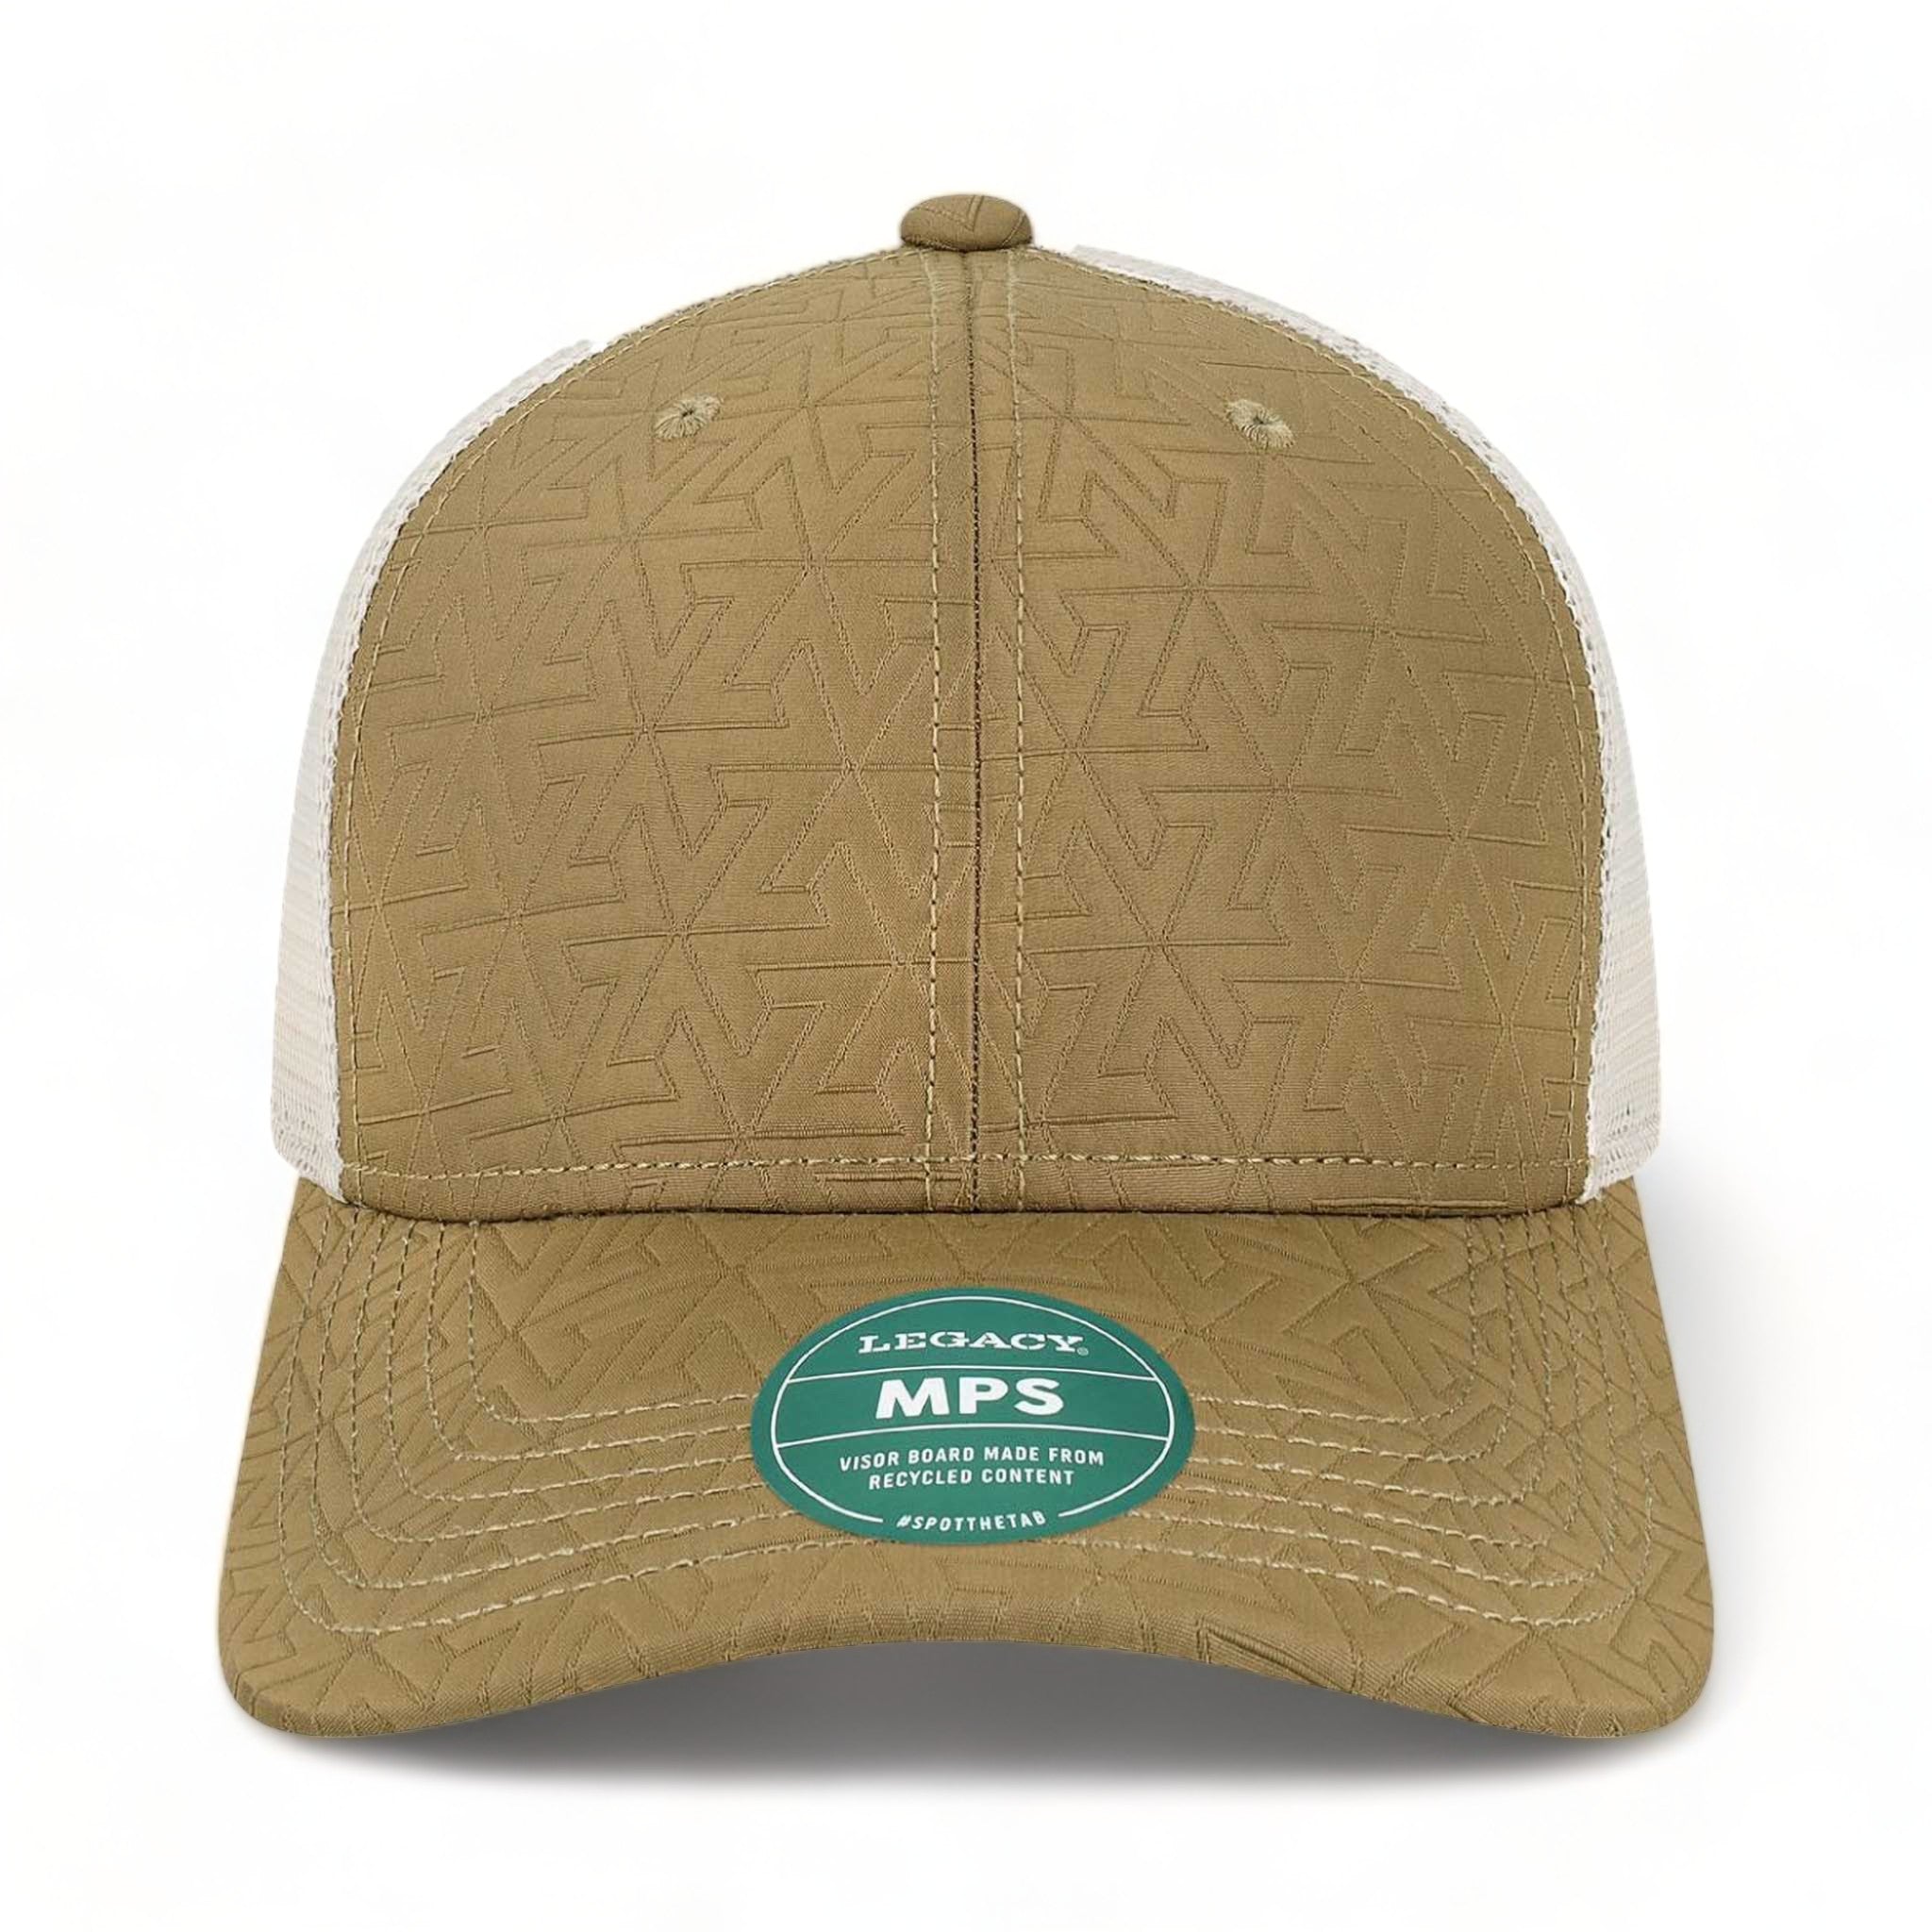 Front view of LEGACY MPS custom hat in brown z - quilted